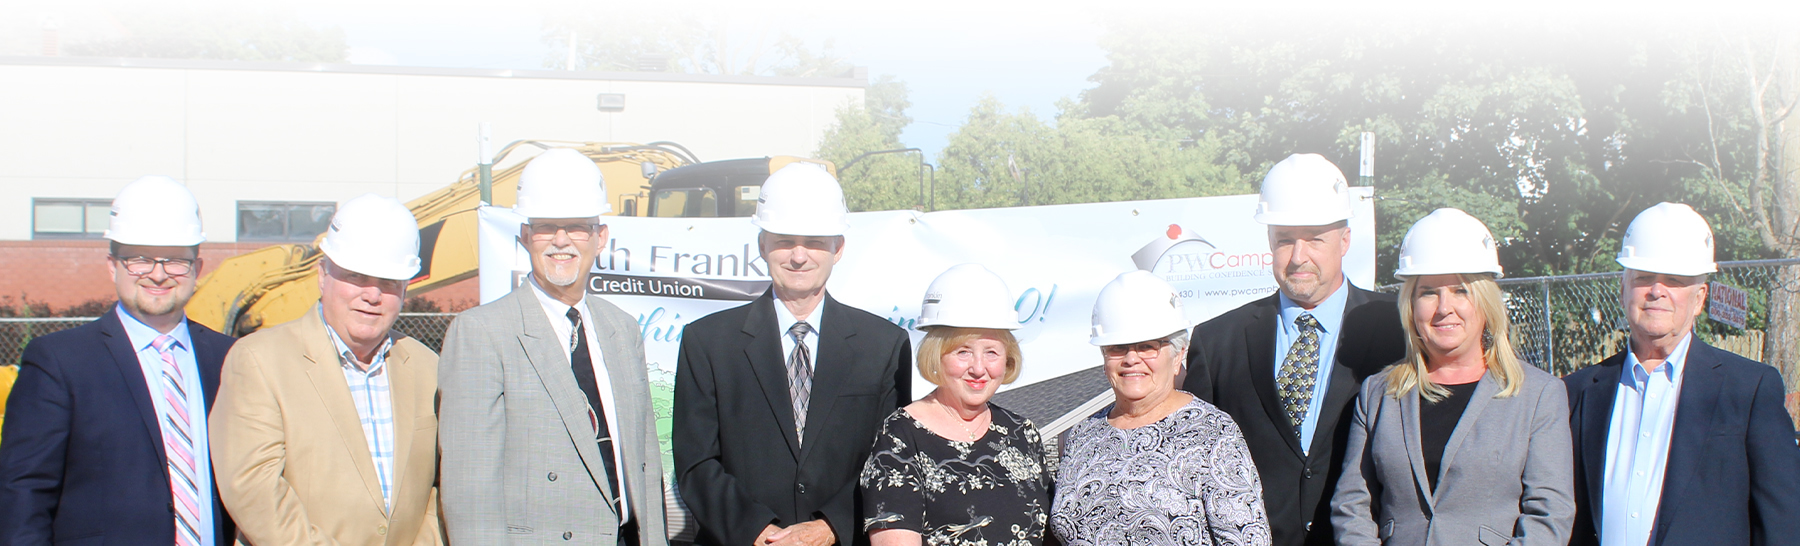 TruNorthern Staff and Board at ground breaking